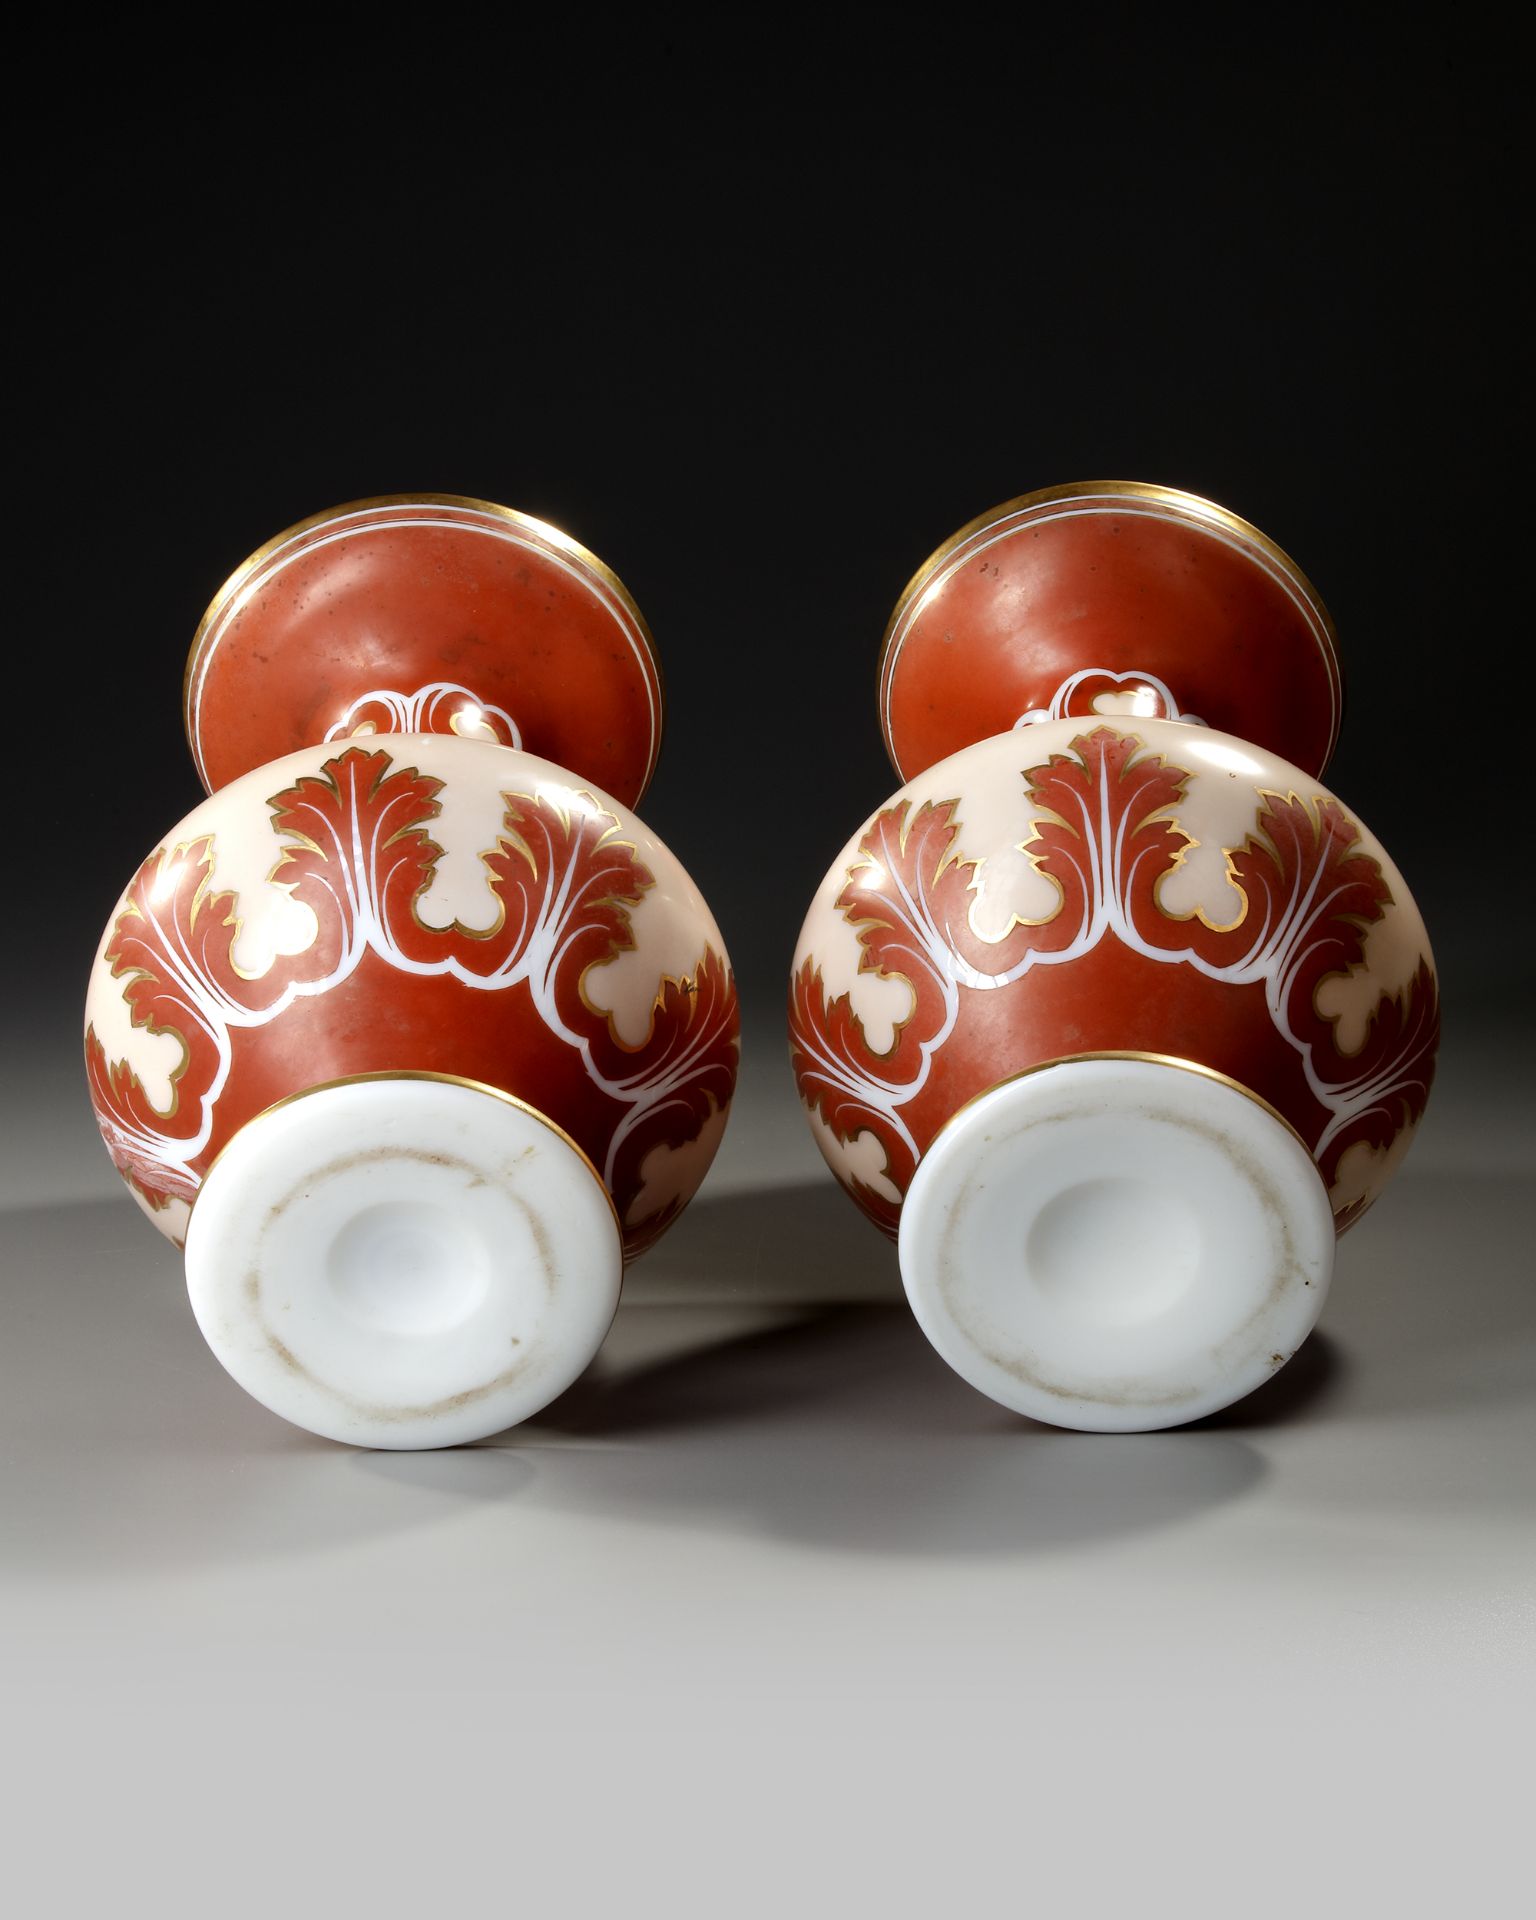 A PAIR OF OPALINE BACCARAT VASES, FRANCE, 19TH CENTURY - Image 5 of 6